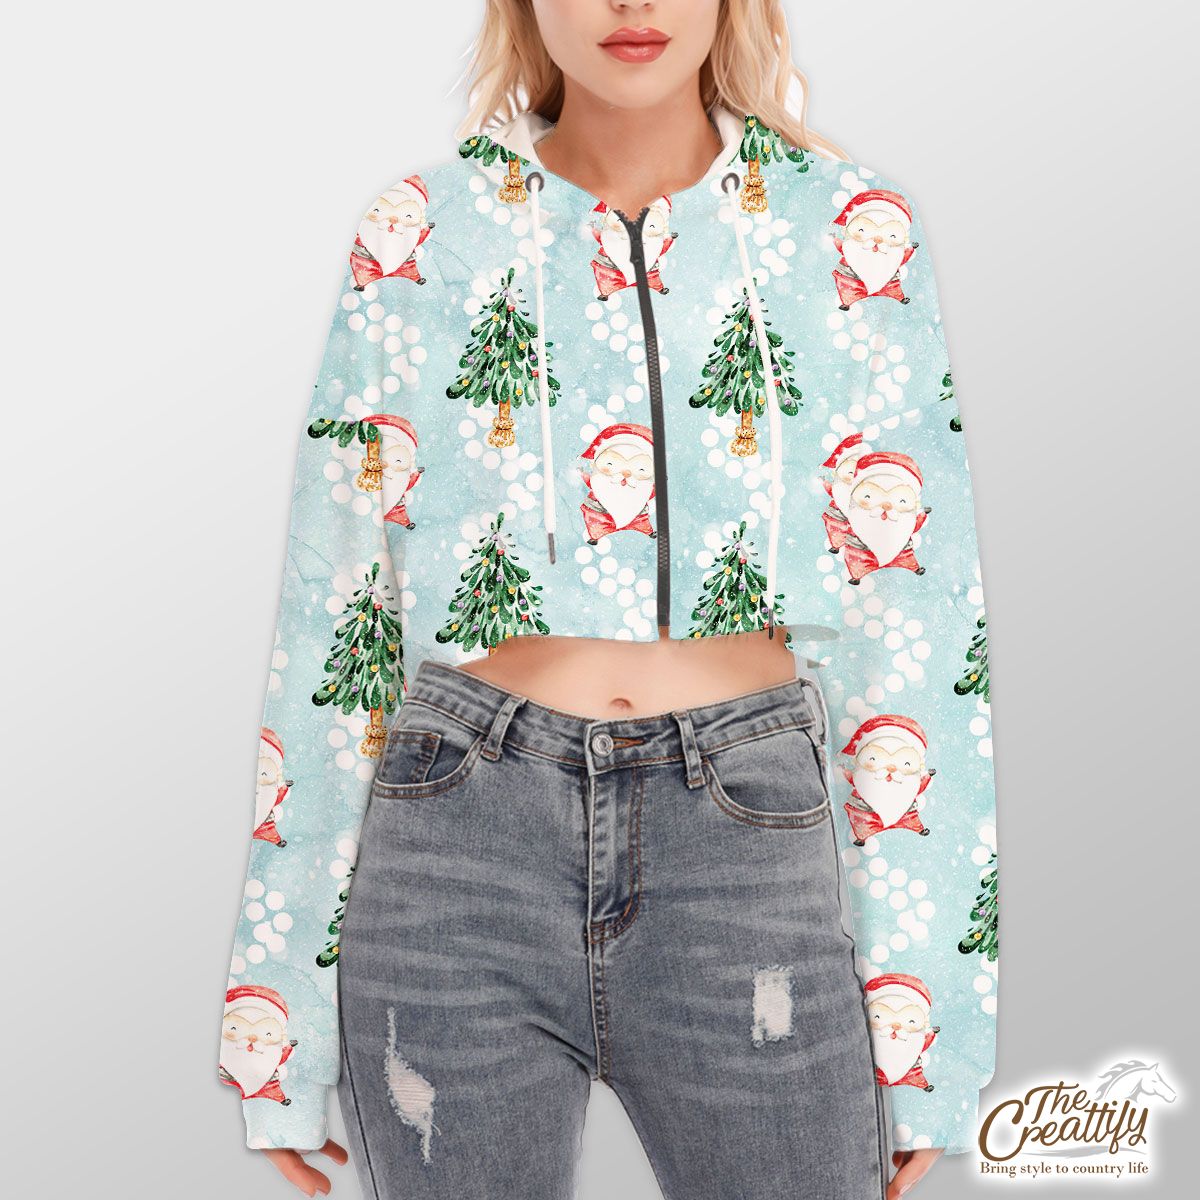 Santa Clause And Christmas Tree On Snowflake Background Hoodie With Zipper Closure